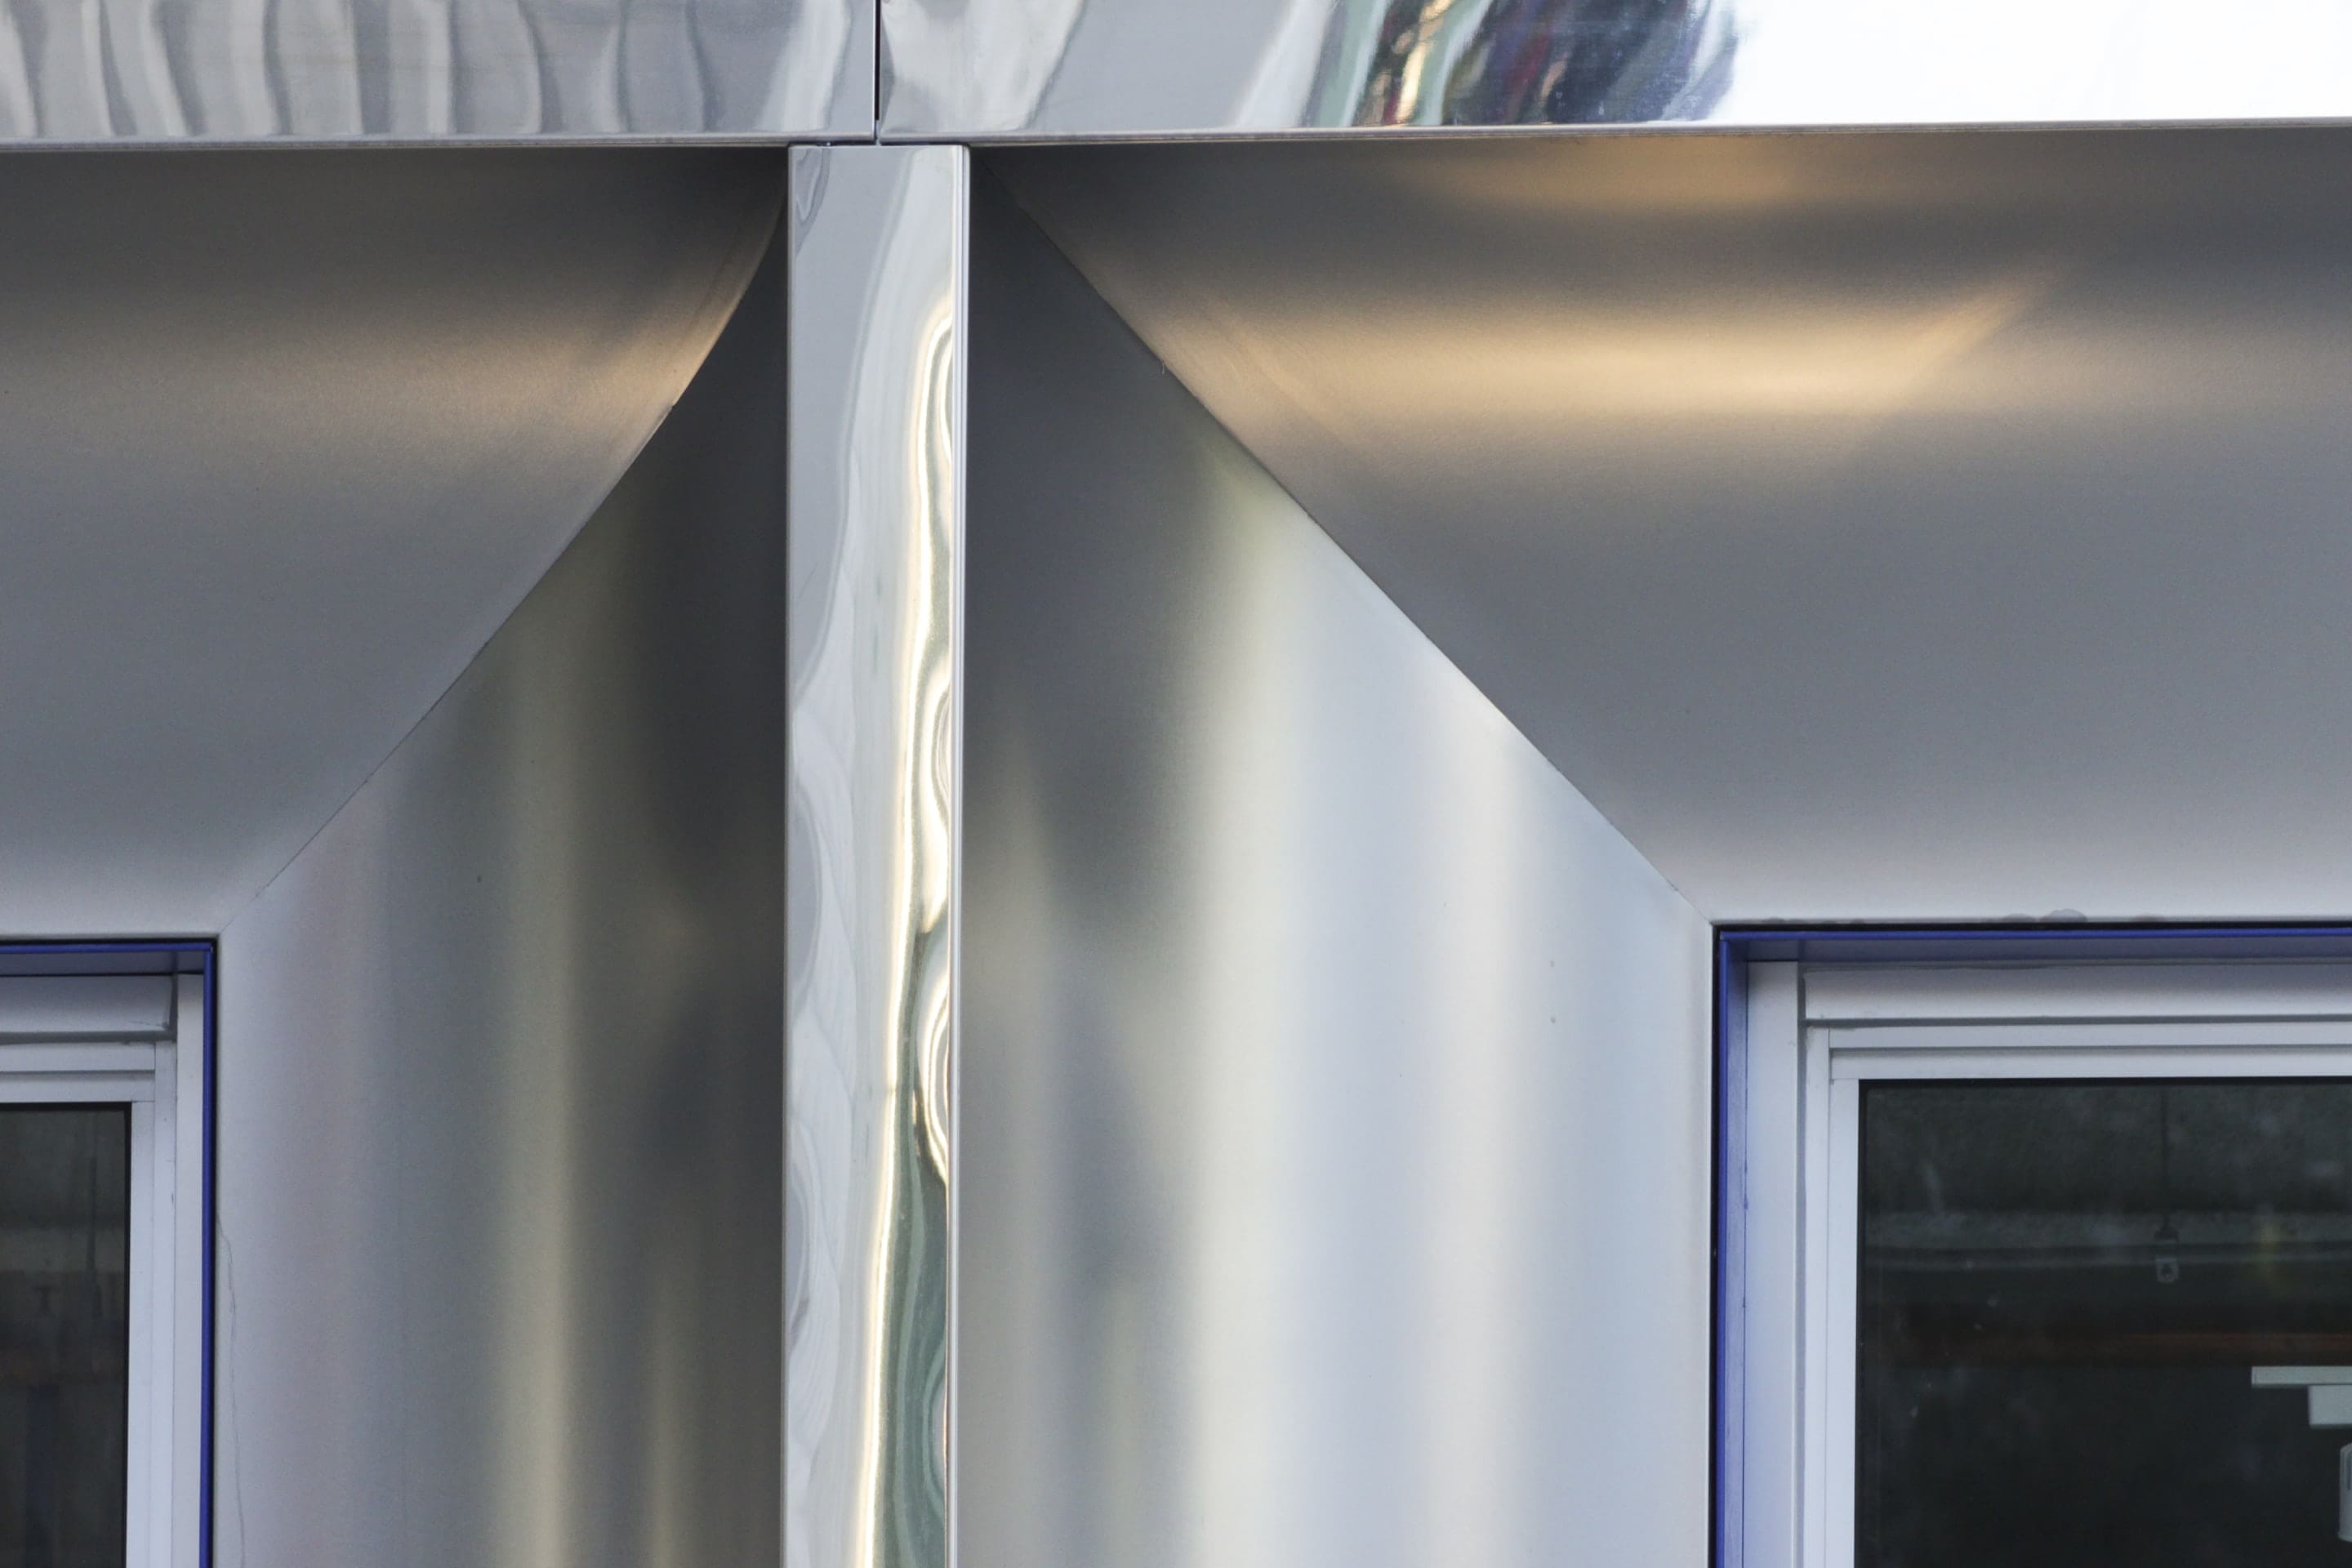 Detail view of the mirror-polish stainless steel trim, Angel Hair cladding, and blue stainless window trim.